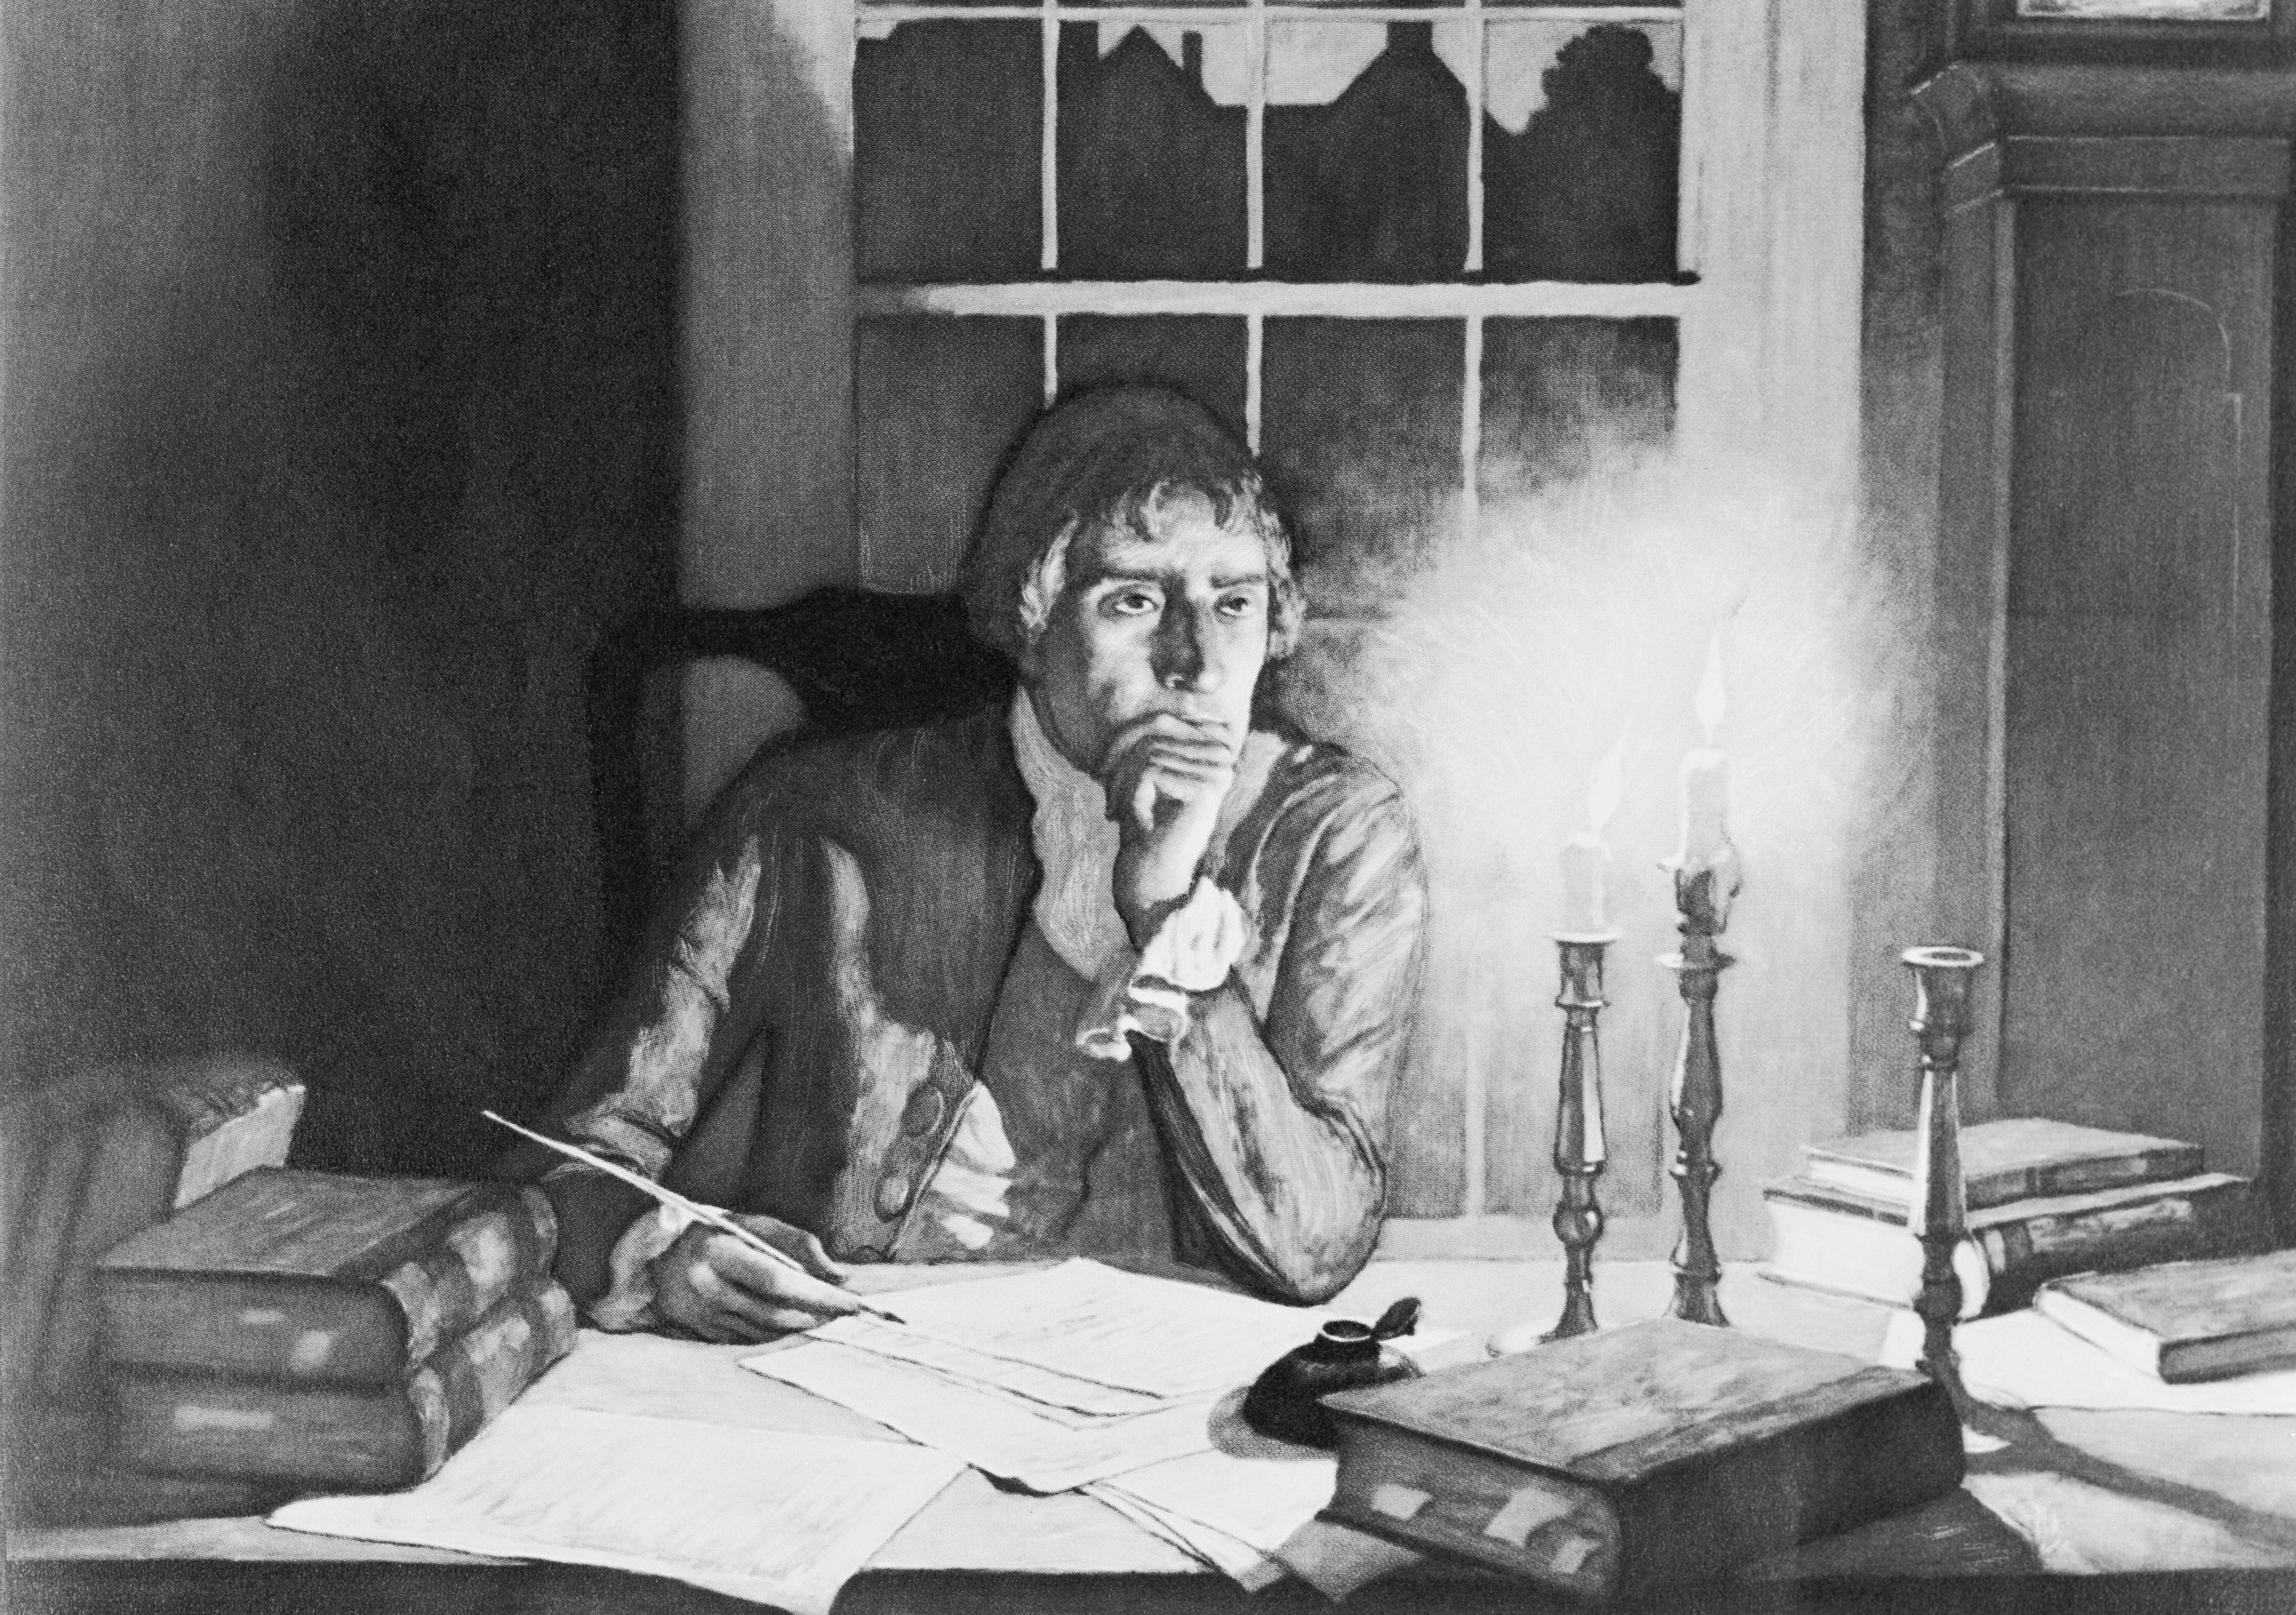 Thomas Jefferson drafting Declaration of Independence; painting by N.C. Wyeth. (Image: Bettmann, Getty Images)